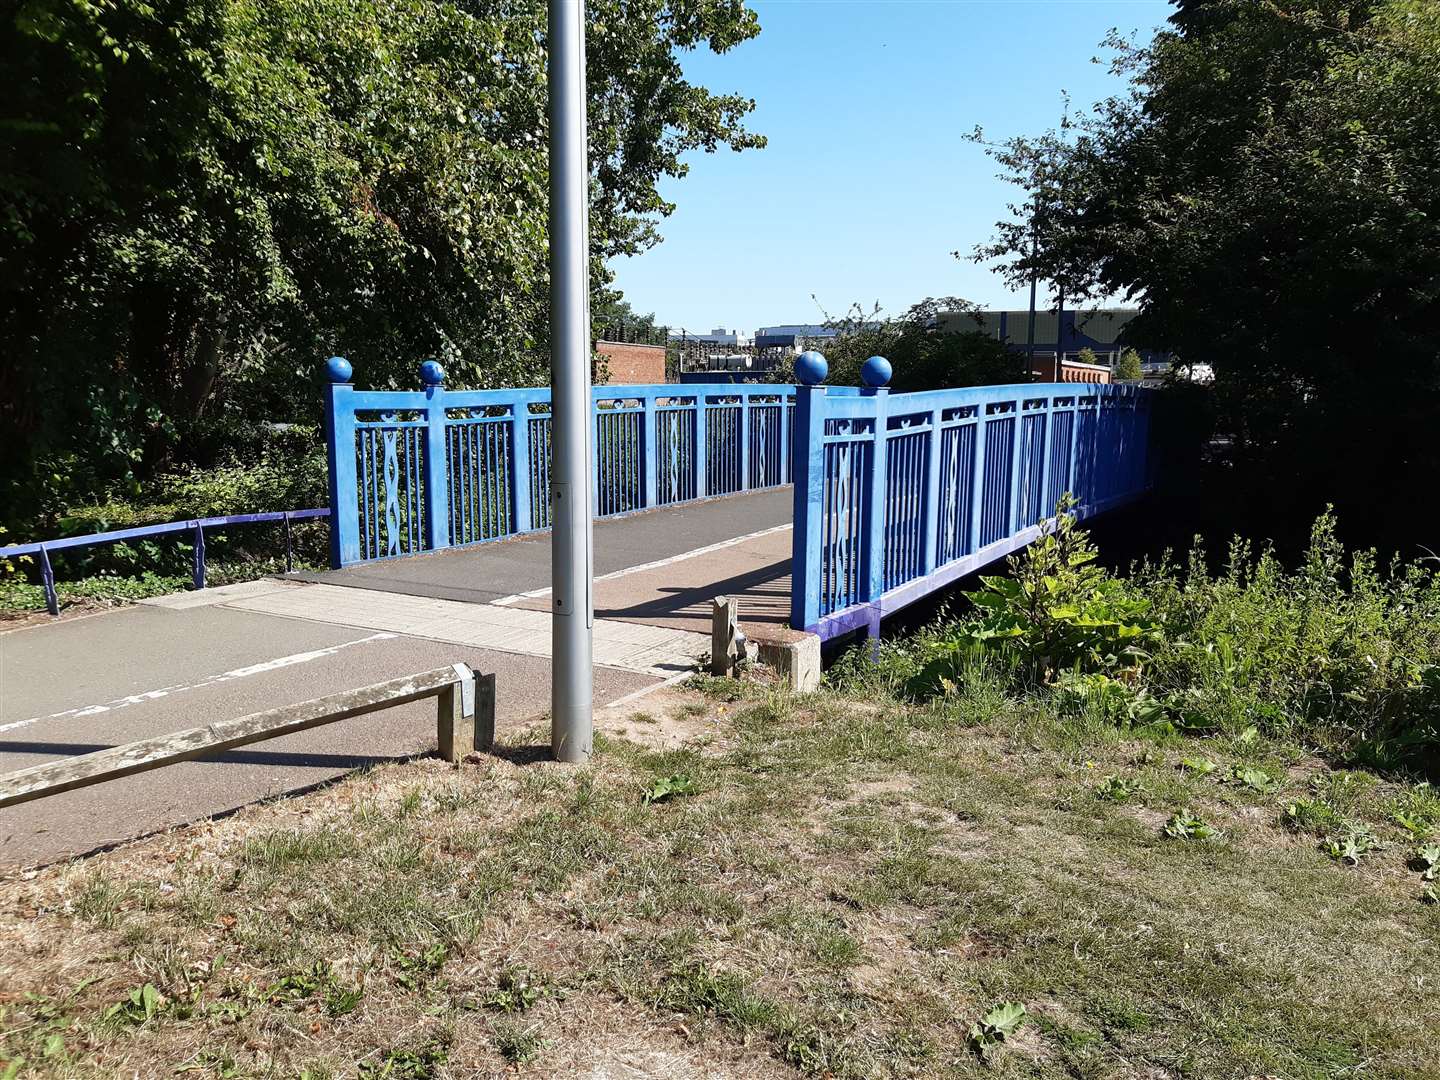 The bridge in Victoria Park where Mr Limbu is believed to have fallen into the water